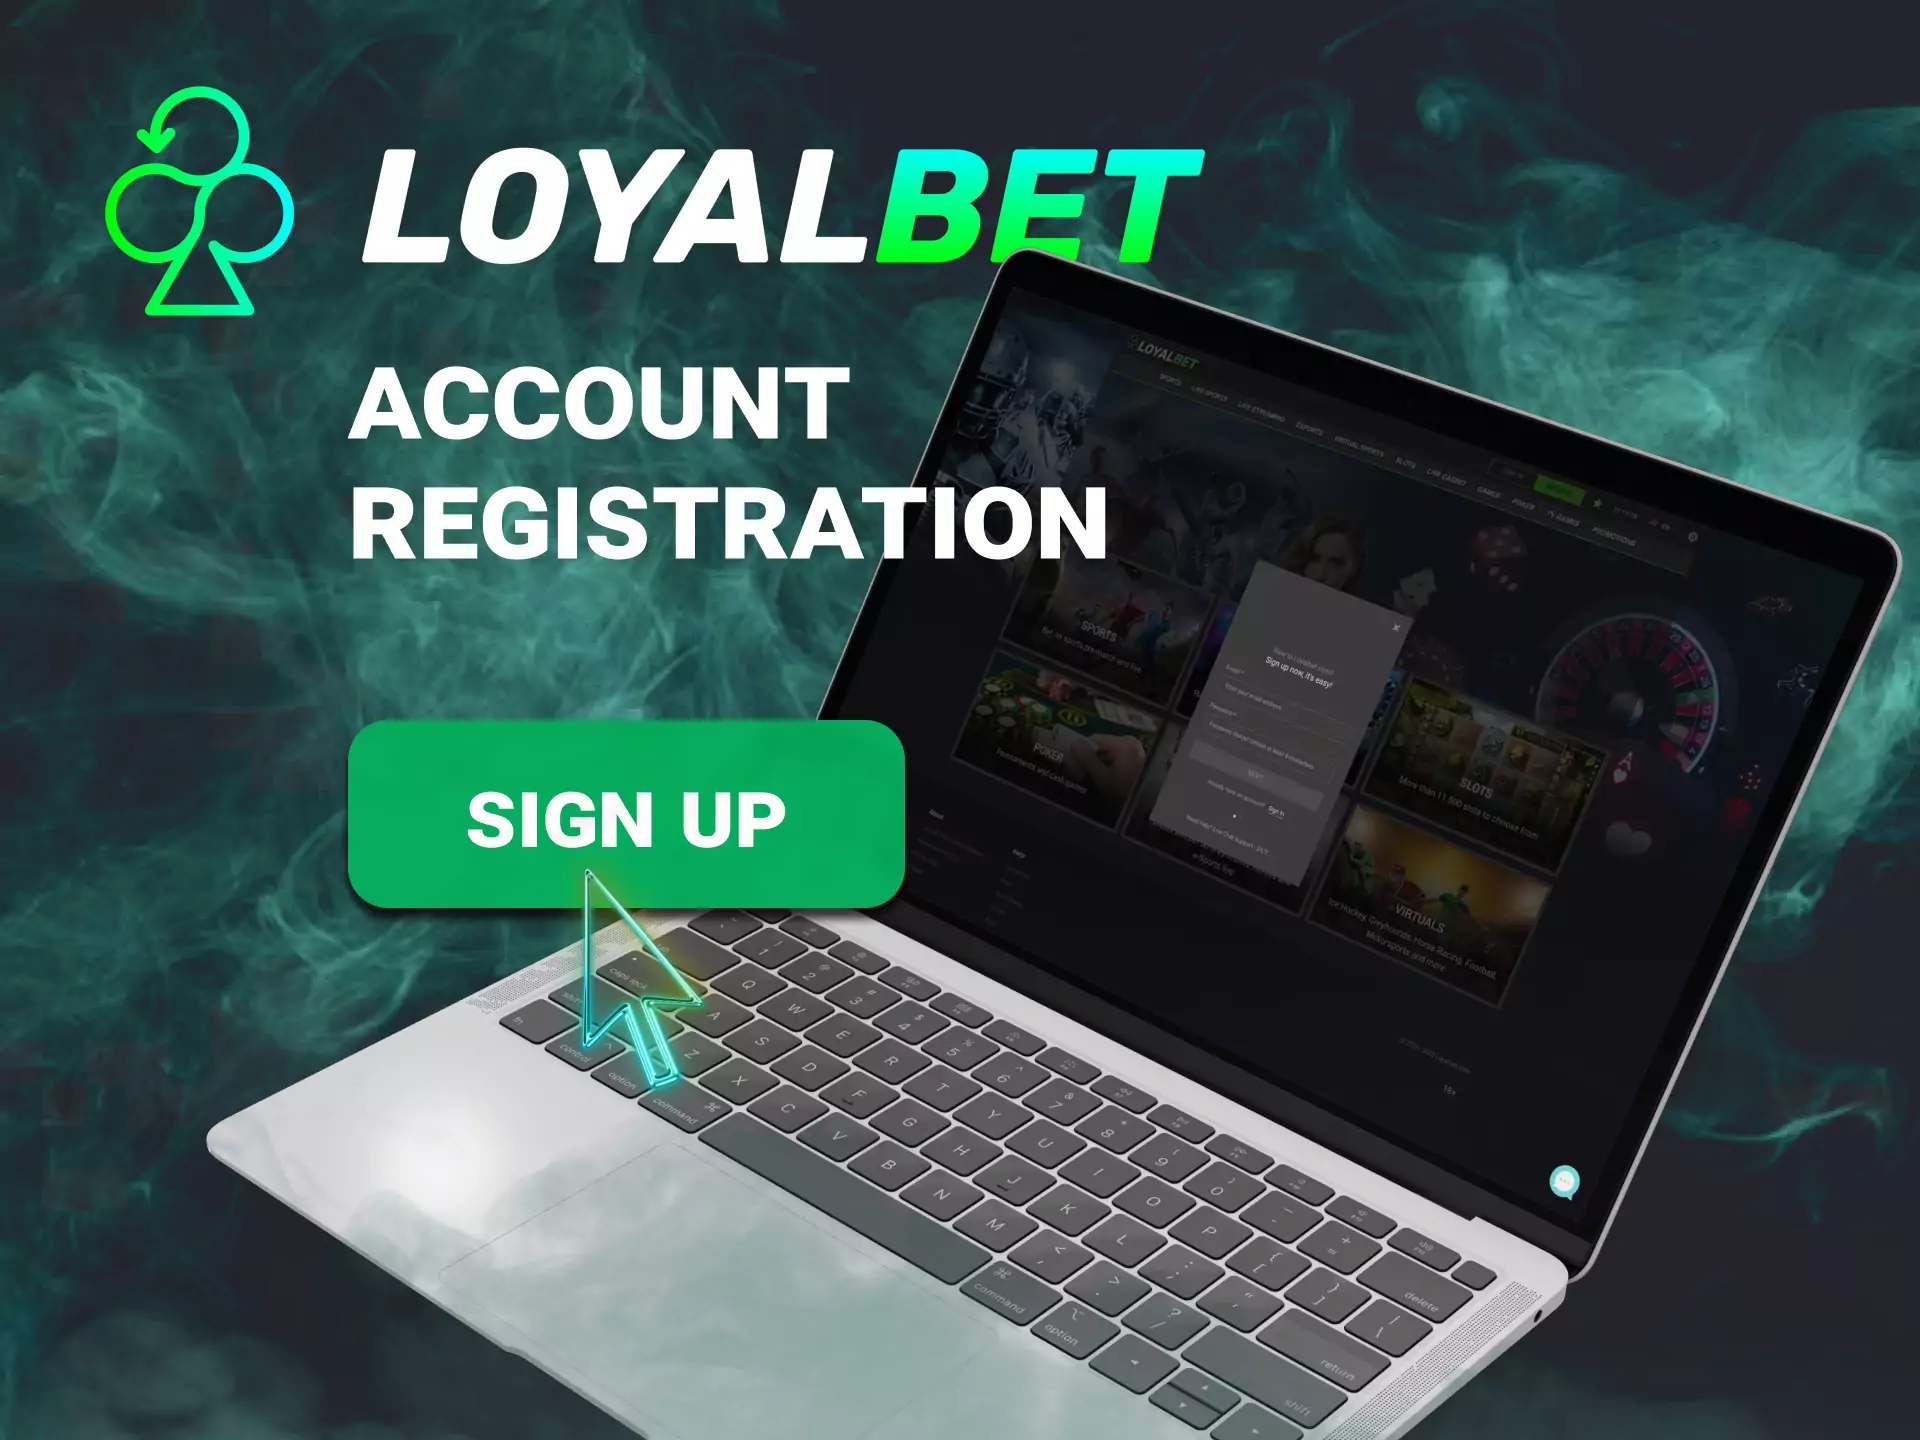 To bet on the Loyalbet website, you have to have an account.